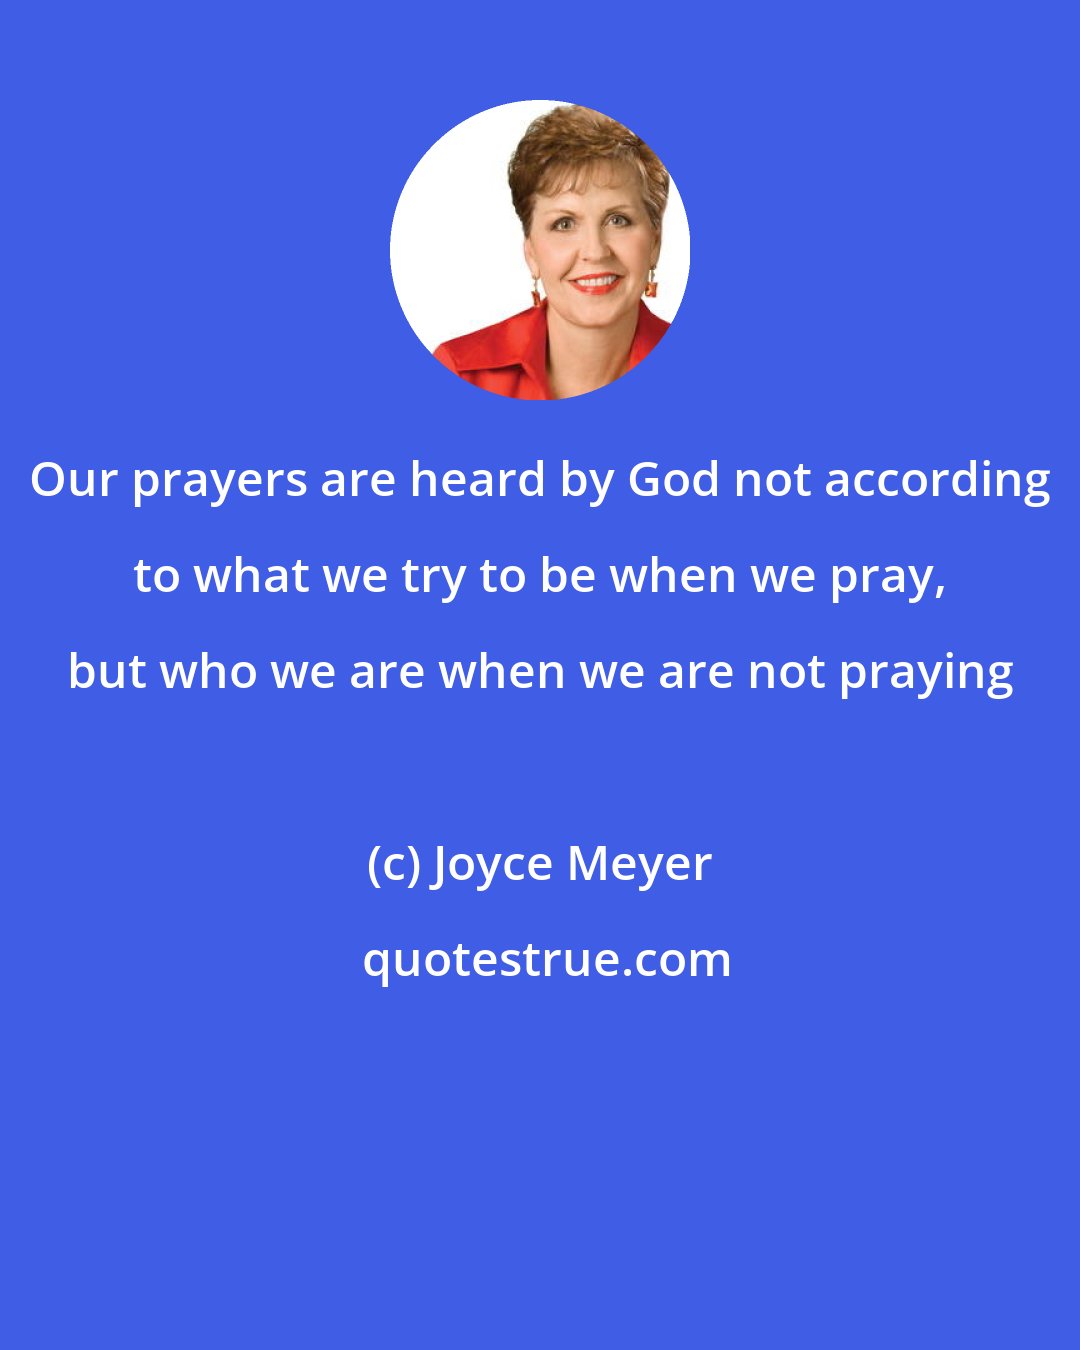 Joyce Meyer: Our prayers are heard by God not according to what we try to be when we pray, but who we are when we are not praying